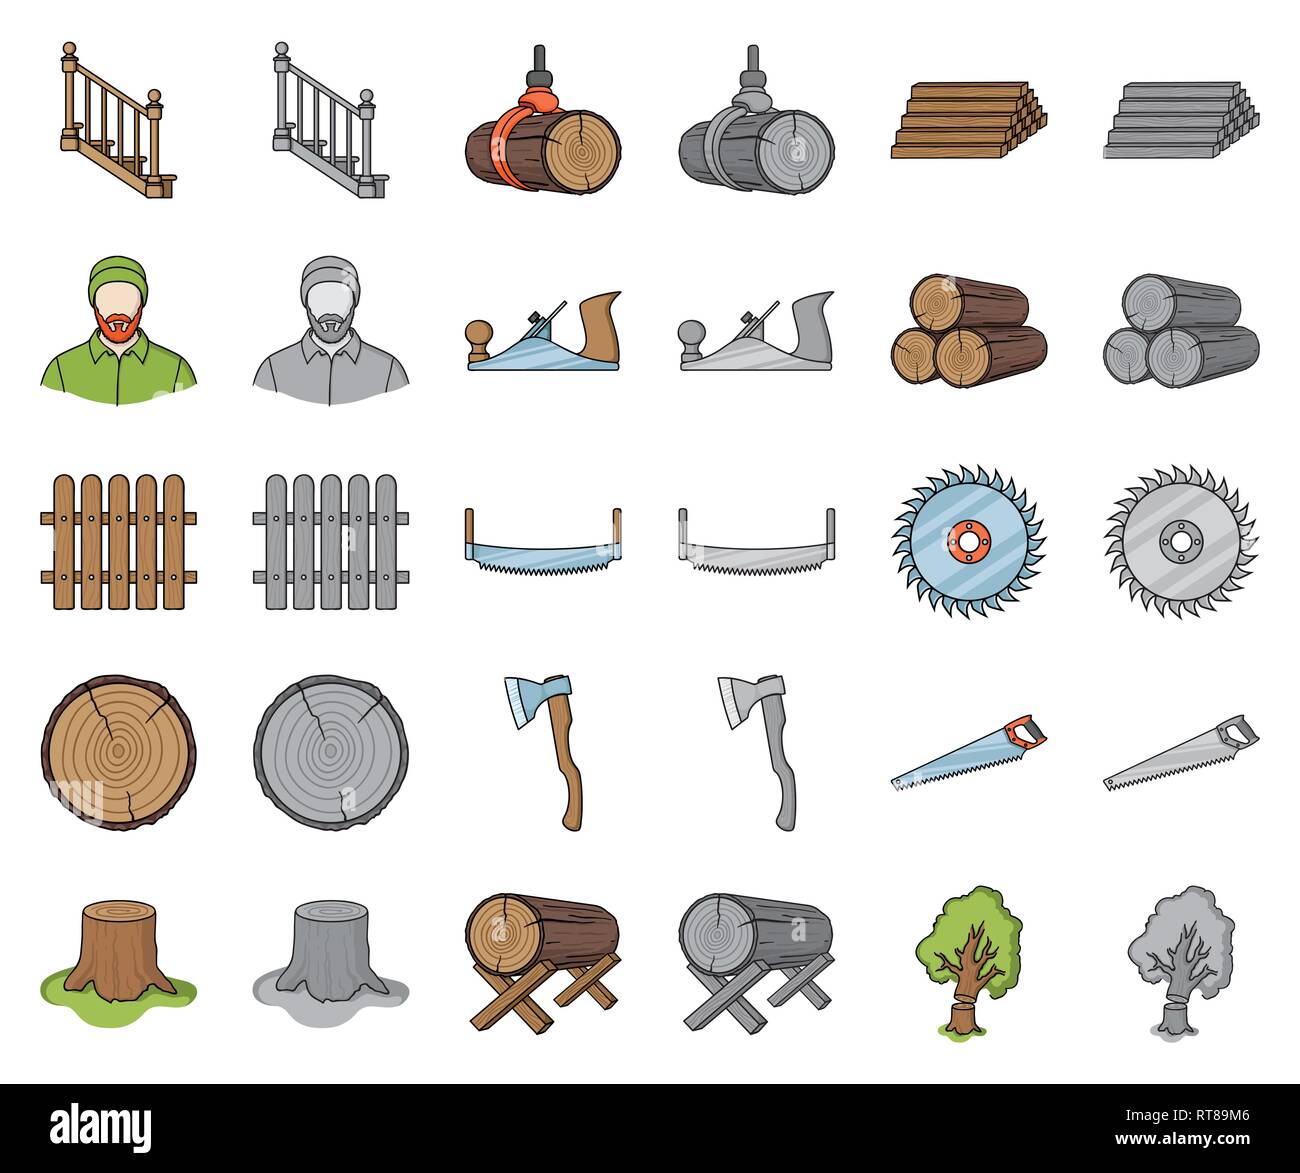 art,axe,cartoon,monochrom,chisel,collection,crane,cross,design,disc,equipment,falling,fence,goats,hand,hydraulic,icon,illustration,isolated,jack,logo,logs,lumber,lumbers,lumbrejack,plane,processing,product,production,saw,sawing,sawmill,section,set,sign,stack,stairs,stump,symbol,timber,tools,tree,two-man,vector,web Vector Vectors , Stock Vector